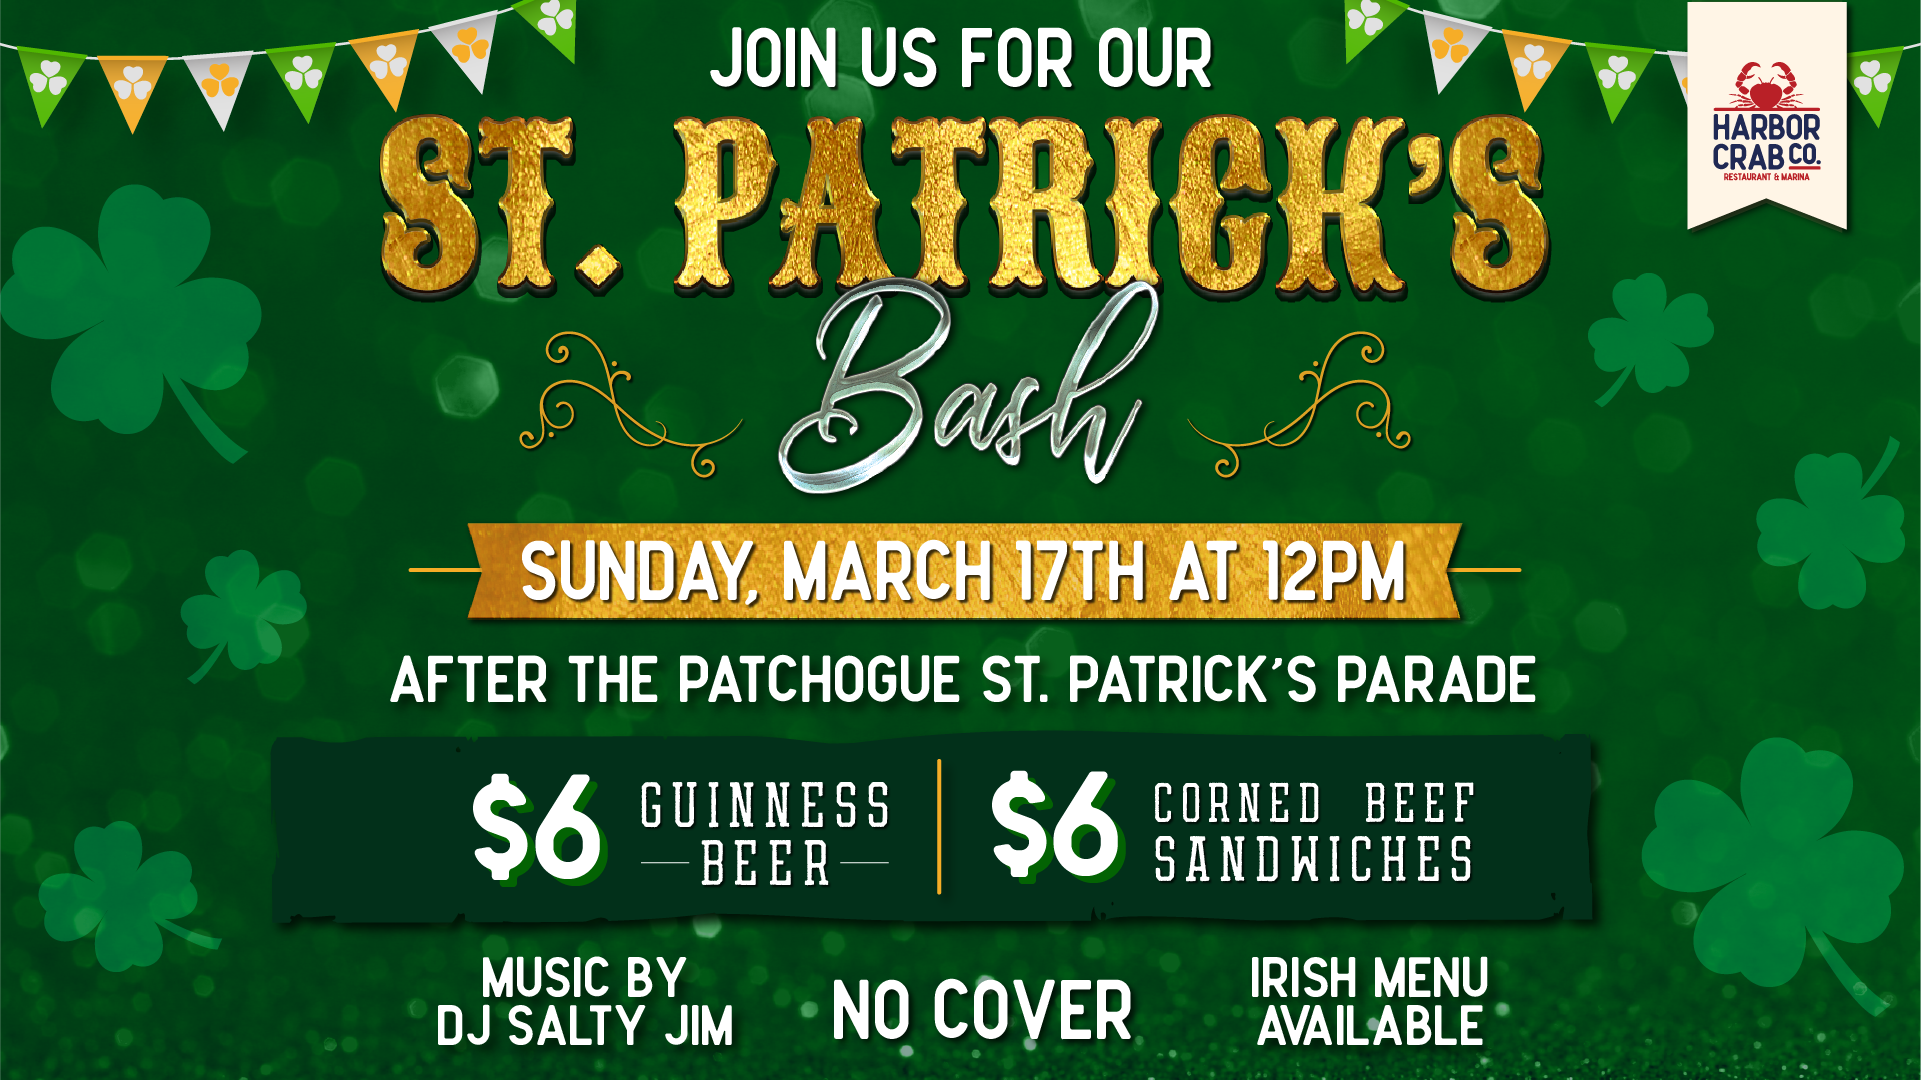 Harbor Crab's St. Patrick's Day Bash featuring festive green background with shamrocks and a banner stating 'Join us for our St. Patrick's Bash.' Details include the event date on Sunday, March 17th at 12 PM following the Patchogue St. Patrick's Parade, special offers such as $6 Guinness beer and corned beef sandwiches, live music by DJ Salty Jim, no cover charge, and a note that an Irish menu is available